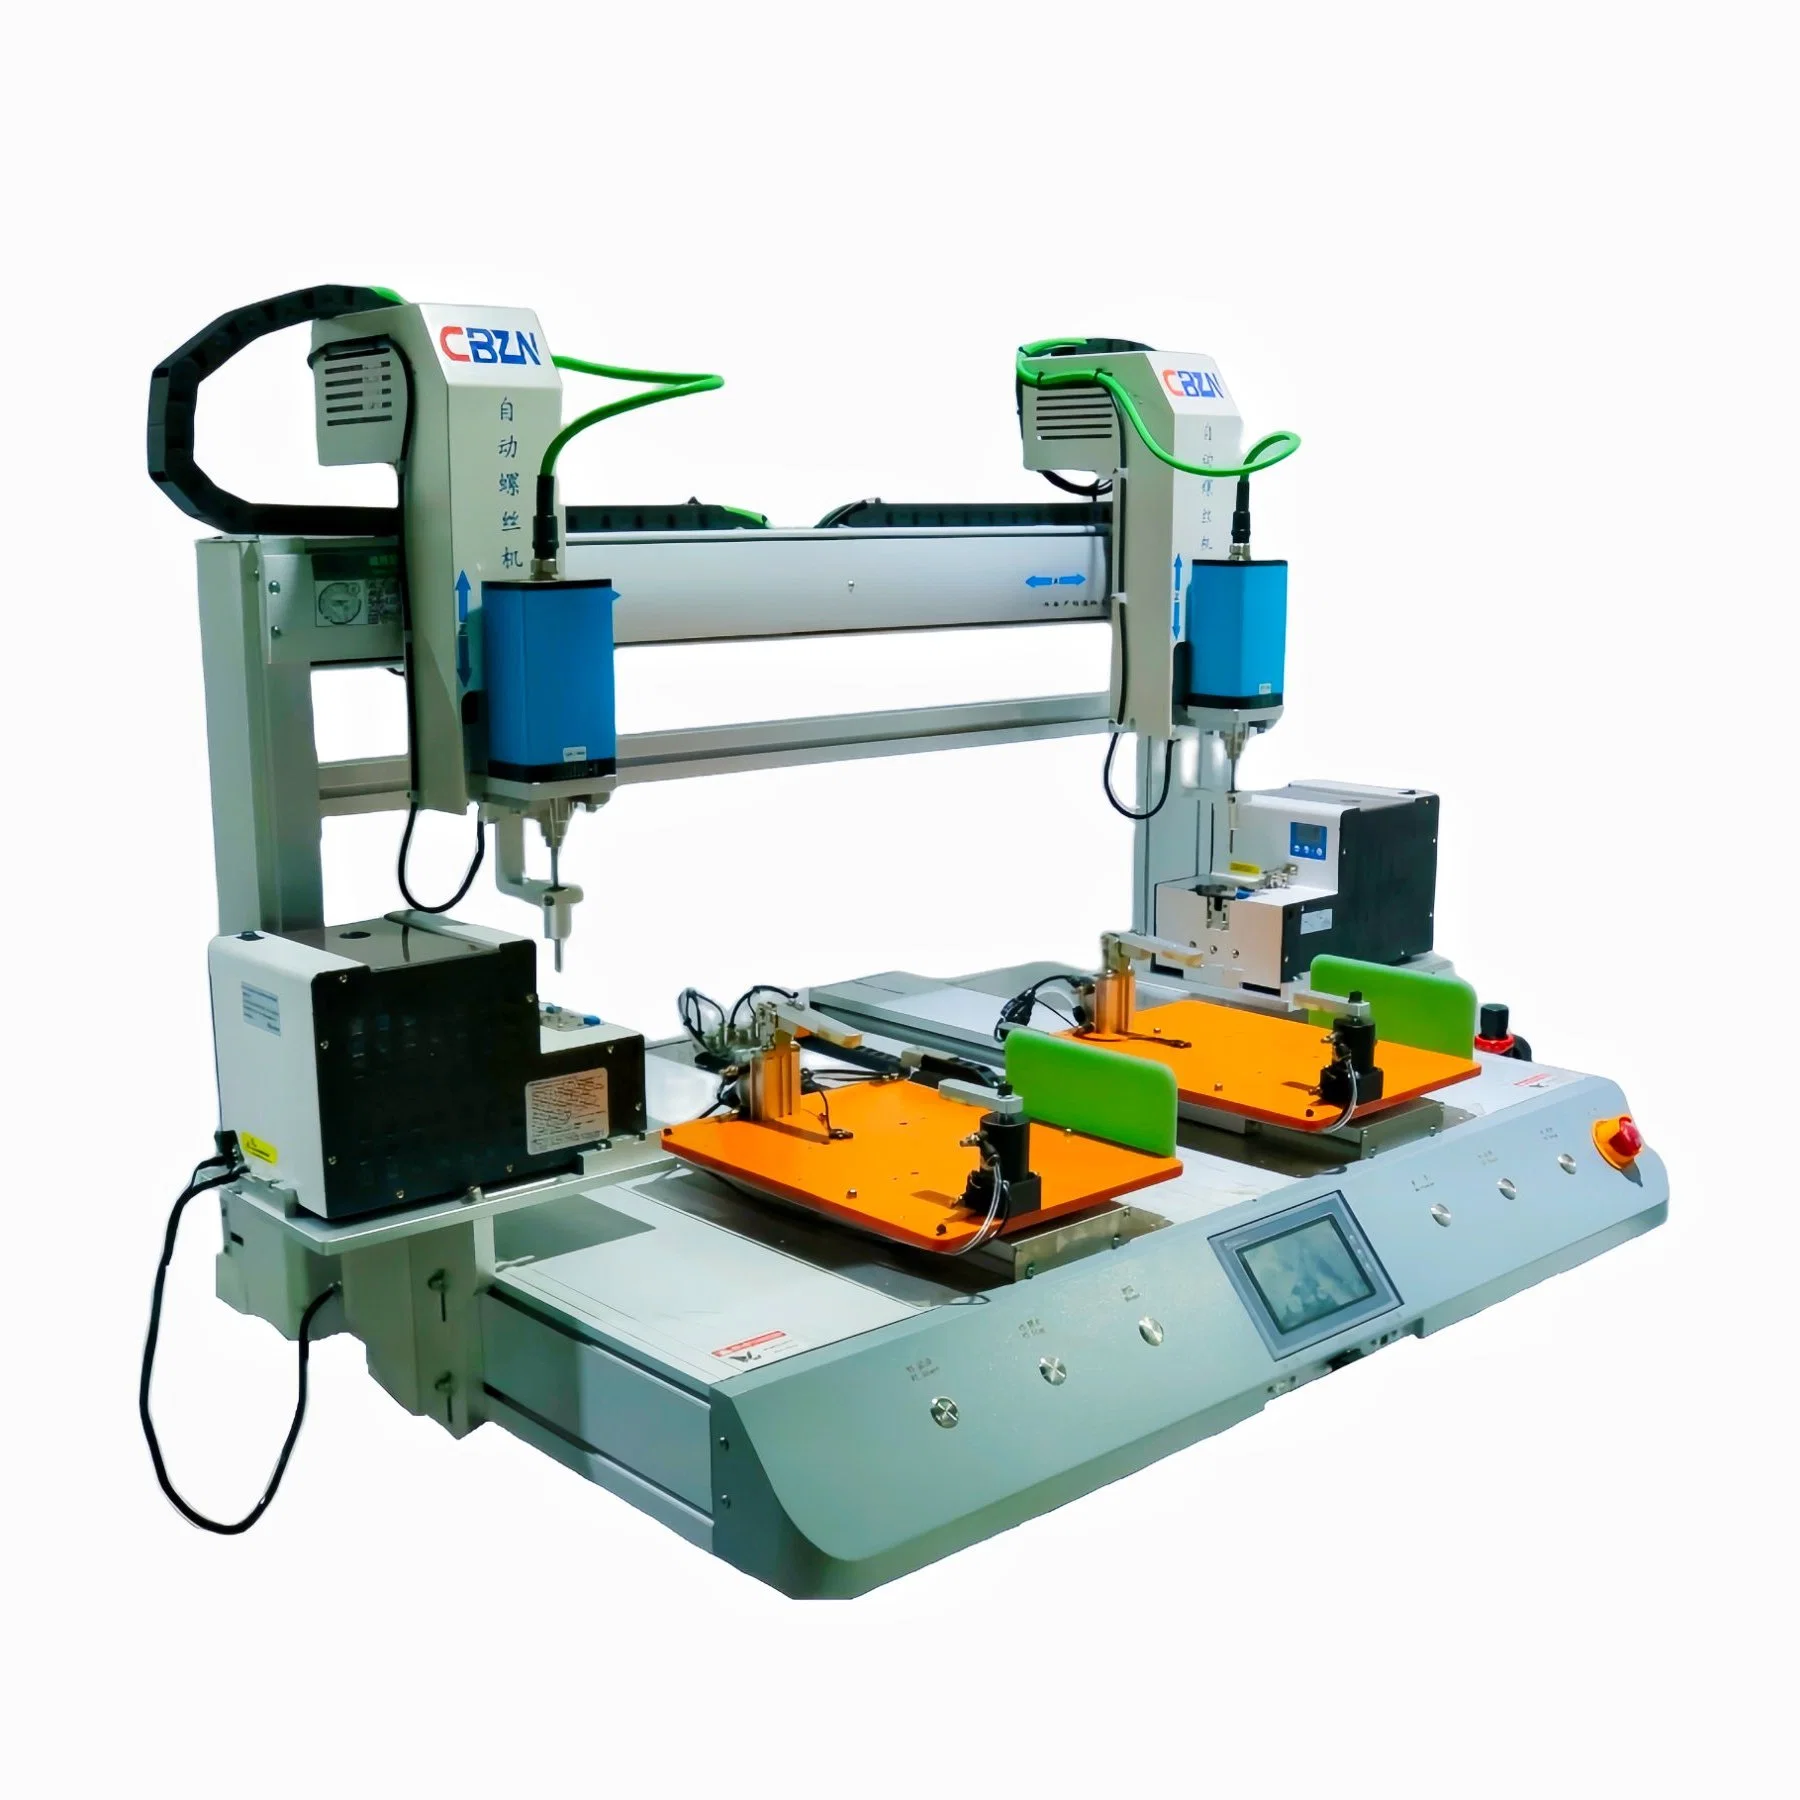 Ra Automatic Screw Locking Machine/Auto Screw Tightening Tool/Electric Driver Equipment for Assembly Line